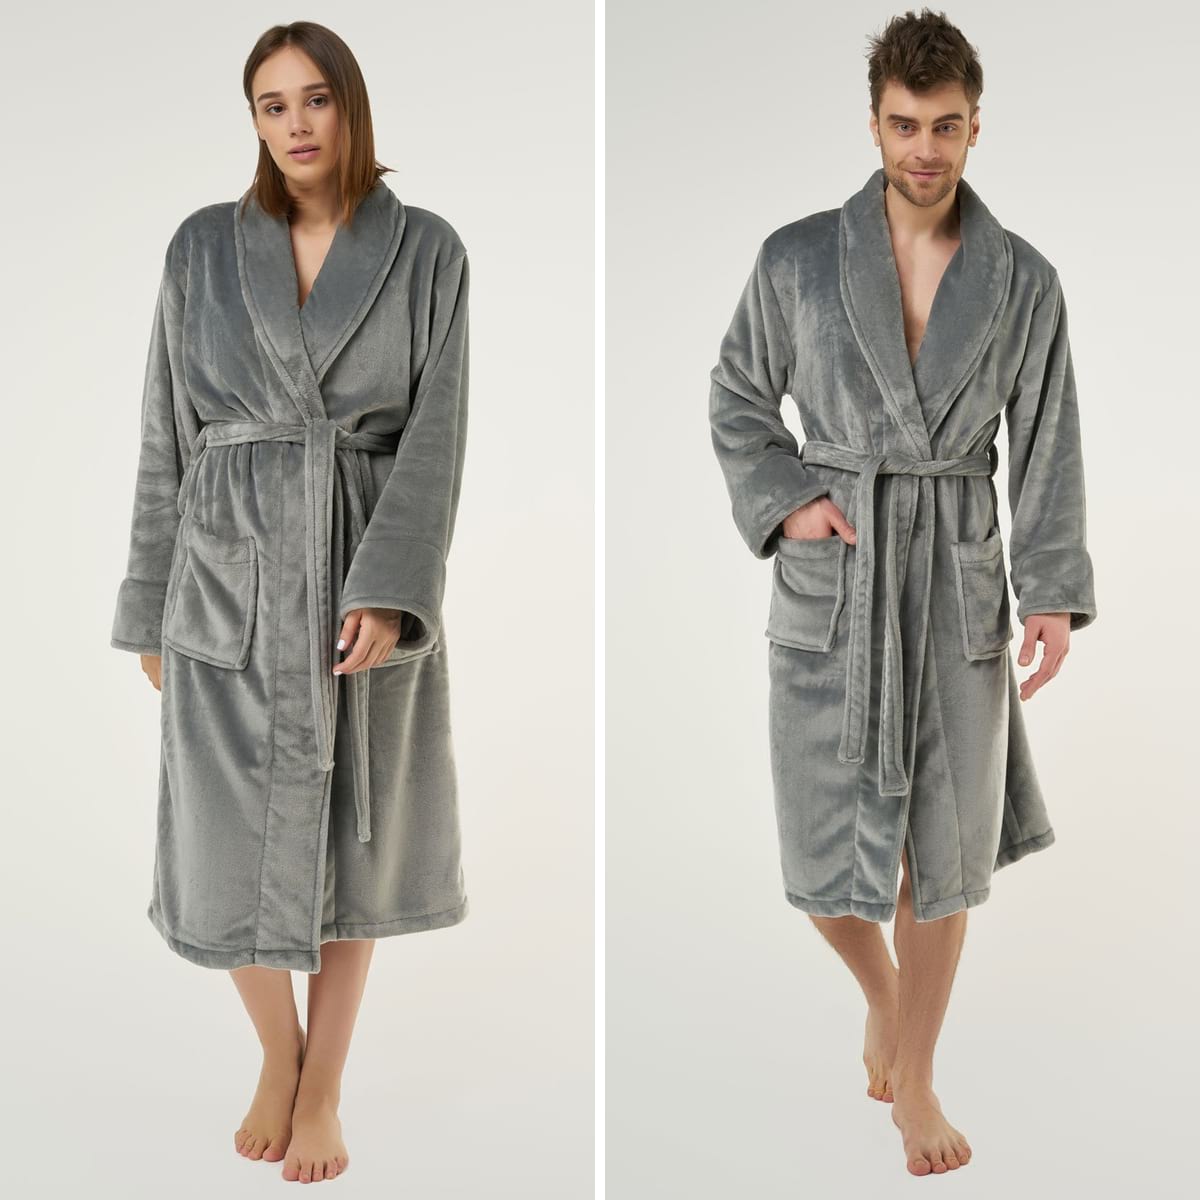 gray super soft tahoe microfleece shawl collar robe | The Best Robes To Buy For Your Spa Or Hotel Business | best robe | girls spa robe